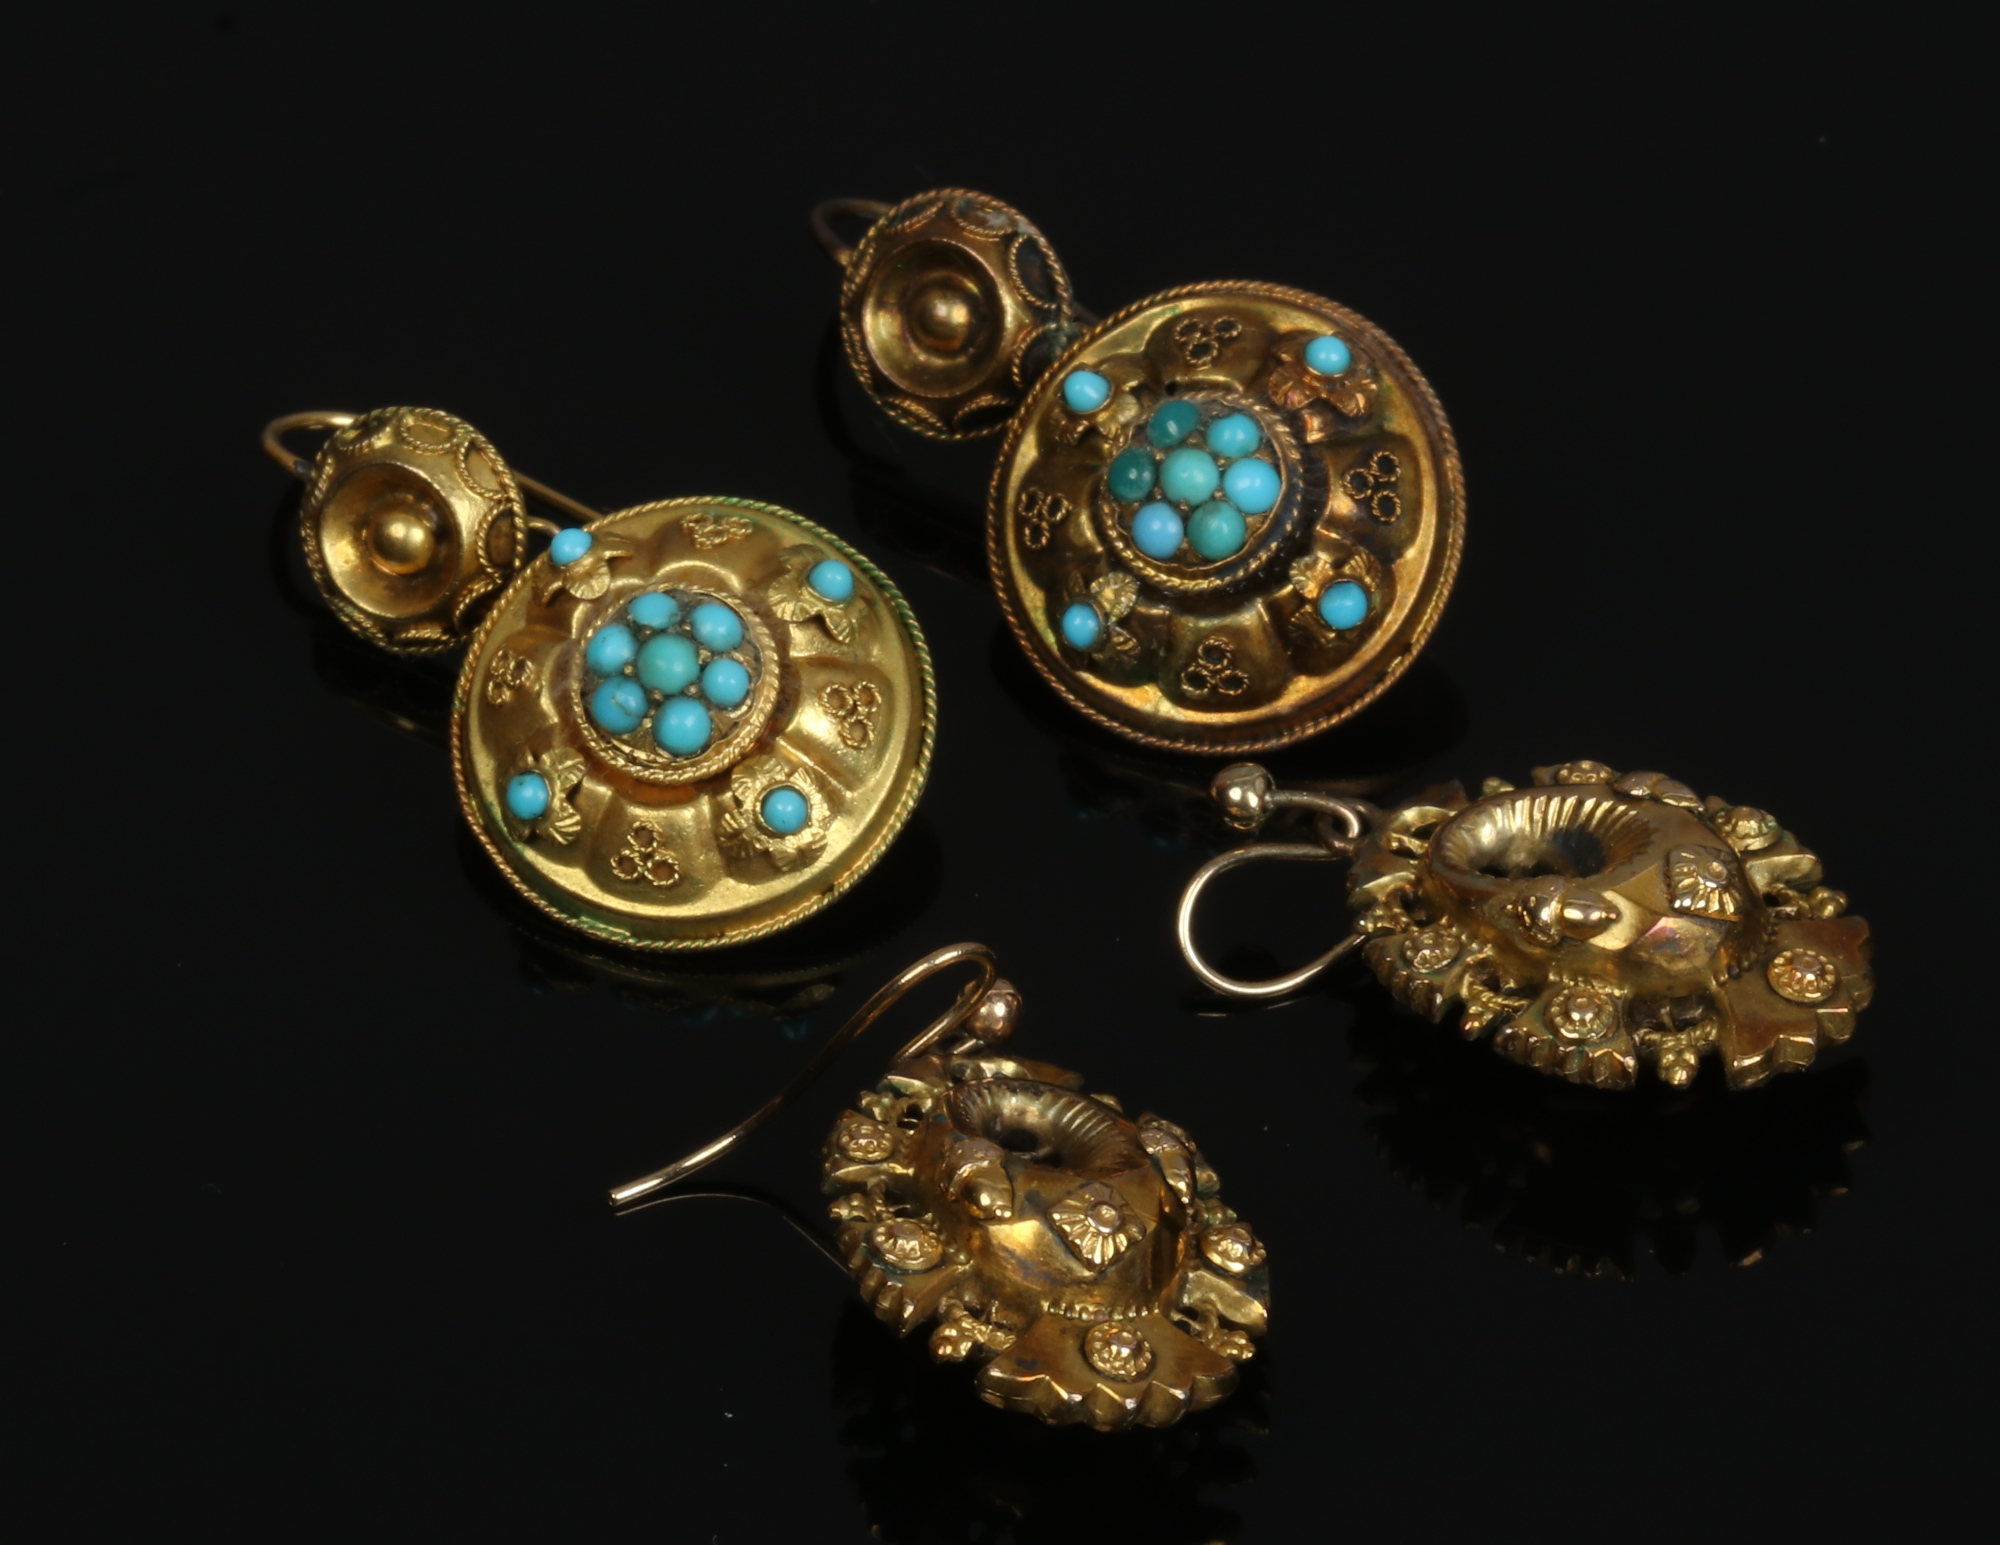 A pair of 19th century pinchbeck and canatielle earrings with turquoise cabochons and a similar pair